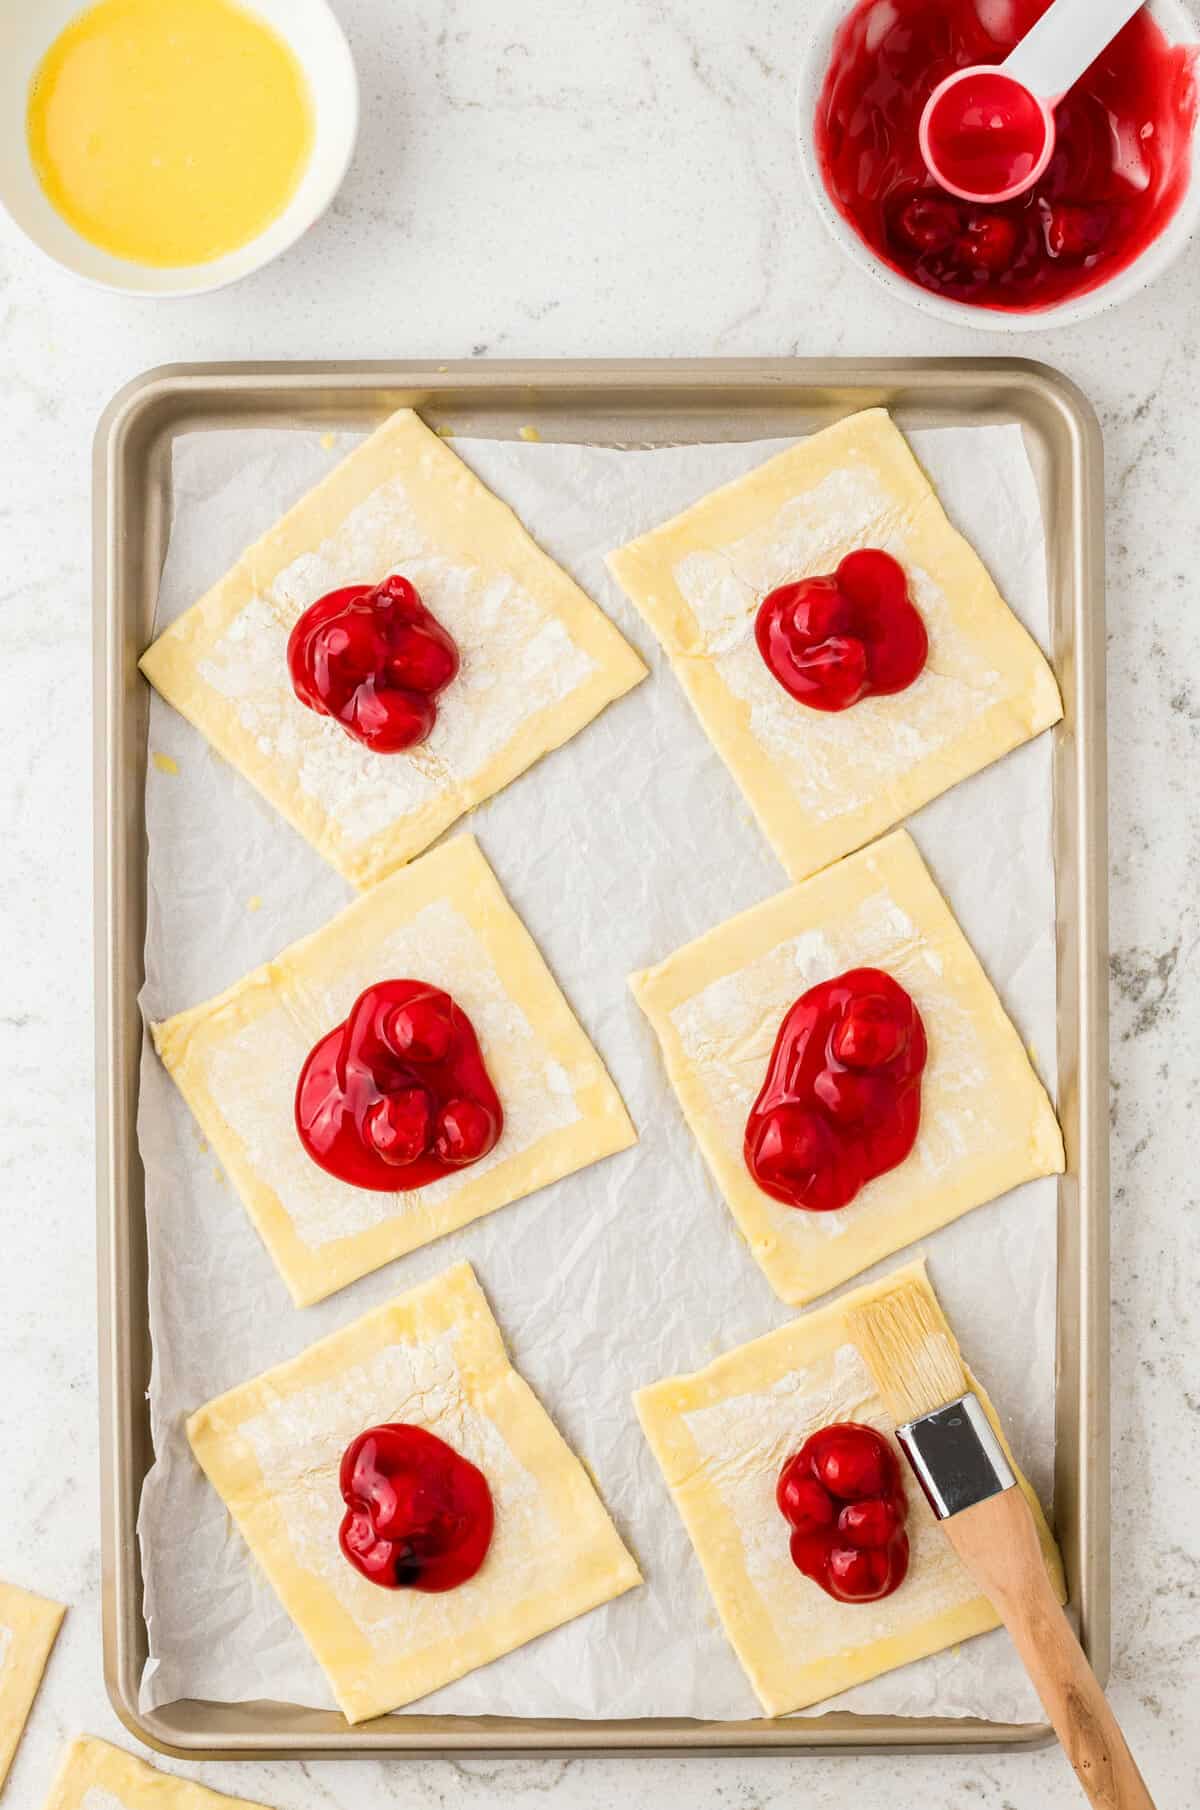 Unbaked Square Pastries with Cherry Pie Filling on Baking Sheet